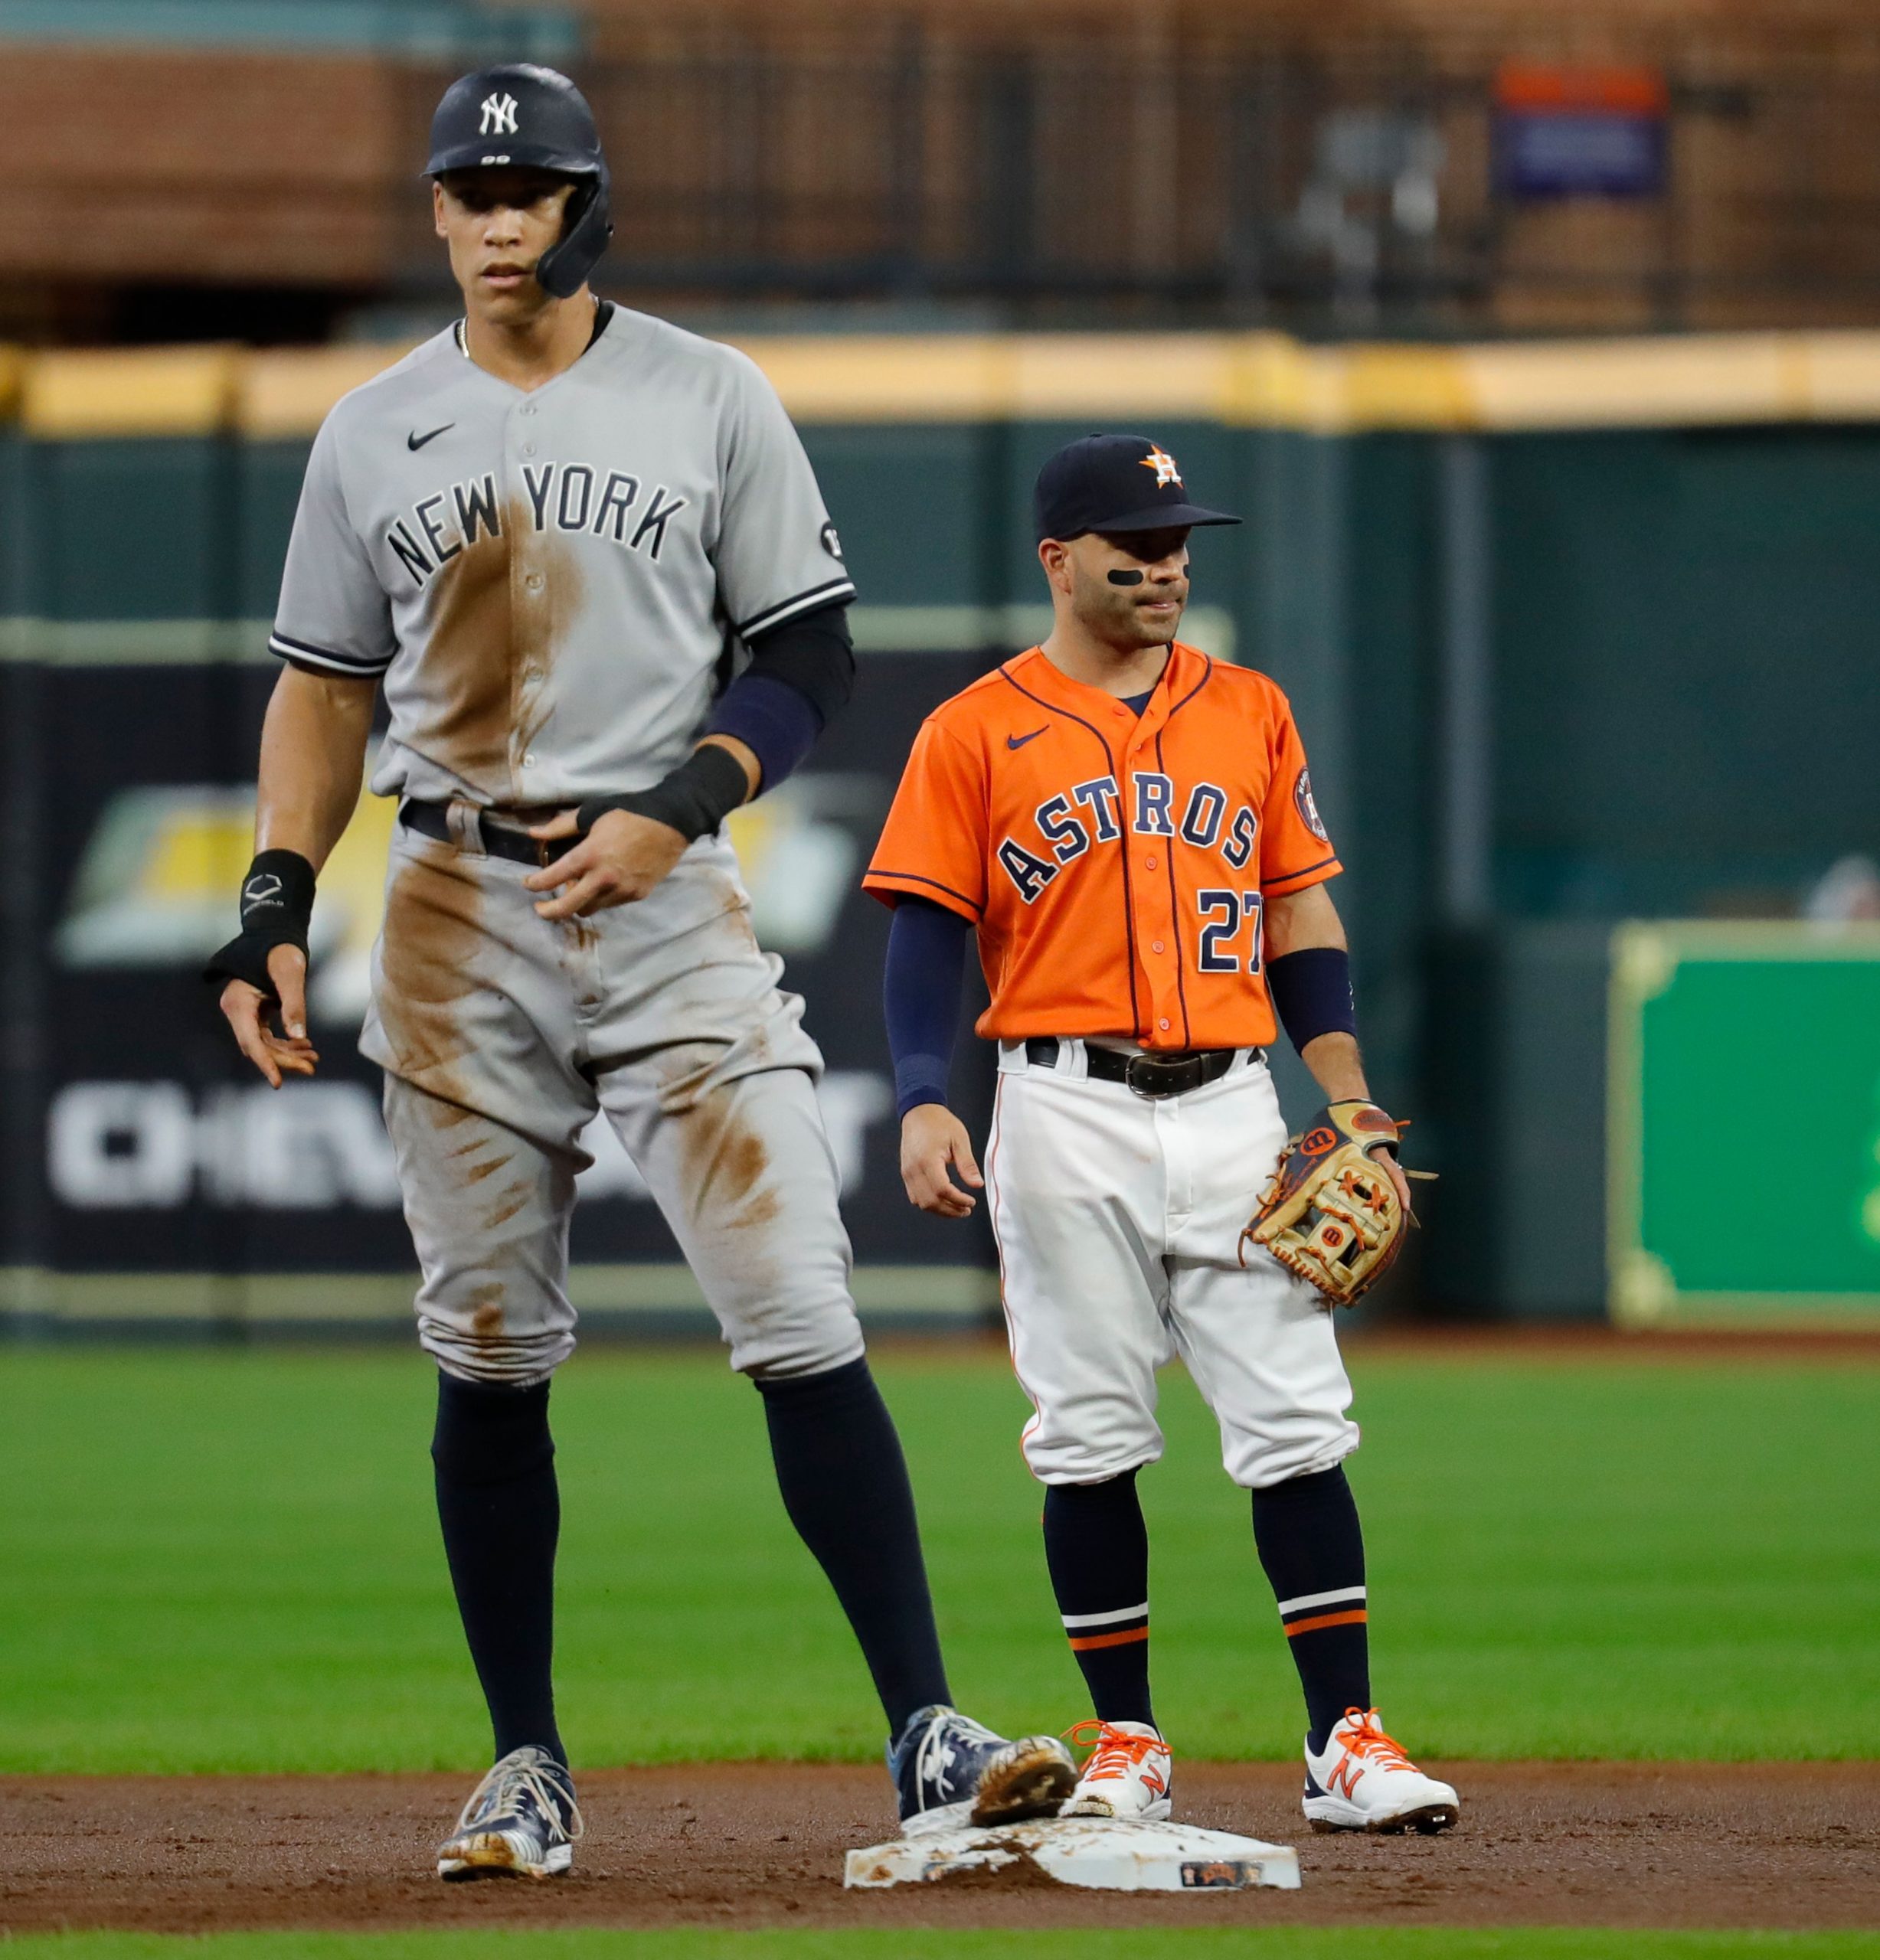 HOUSTON, TEXAS - JULY 09: Aaron Judge #99 of the New York Yankees stands on second base while Jose Altuve #27 of the Houston Astros looks on at Minute Maid Park on July 09, 2021 in Houston, Texas. Bob Levey/Getty Images